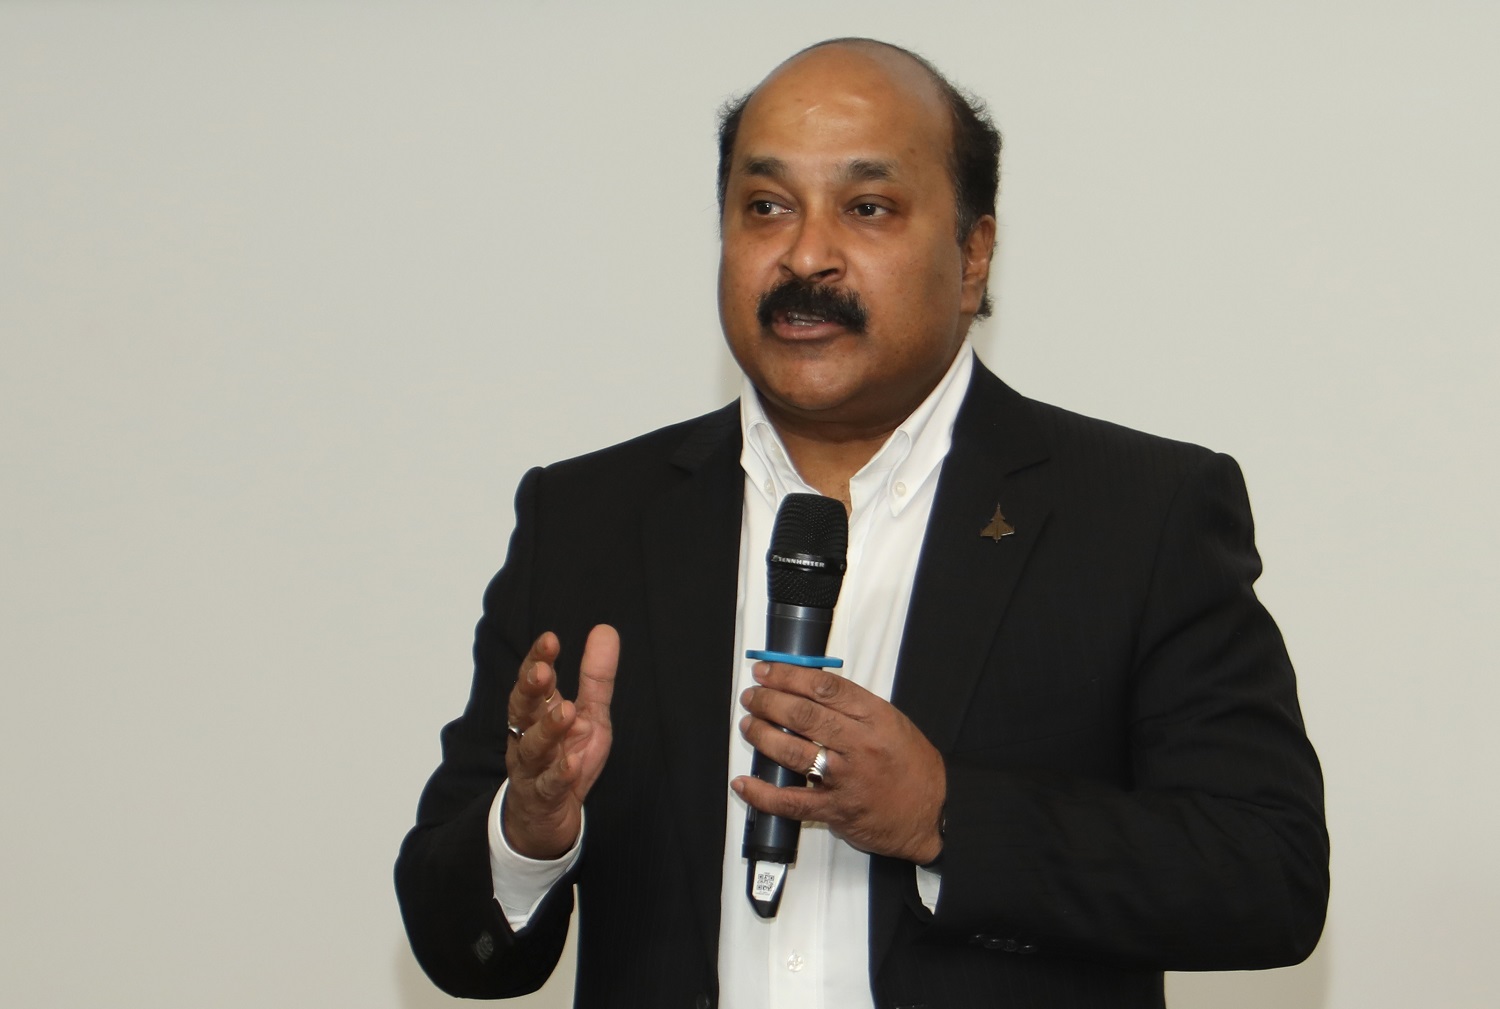 Rajkiran Kanagala, Vice President and Group Head, Business Strategy, TCI, said: “There is transparency in the calculation of emission and it has an API which can be part of the ERP. There is a provision for EVs too. To ensure ease of use for all logistics players in the ecosystem, the tool is multi-lingual.”